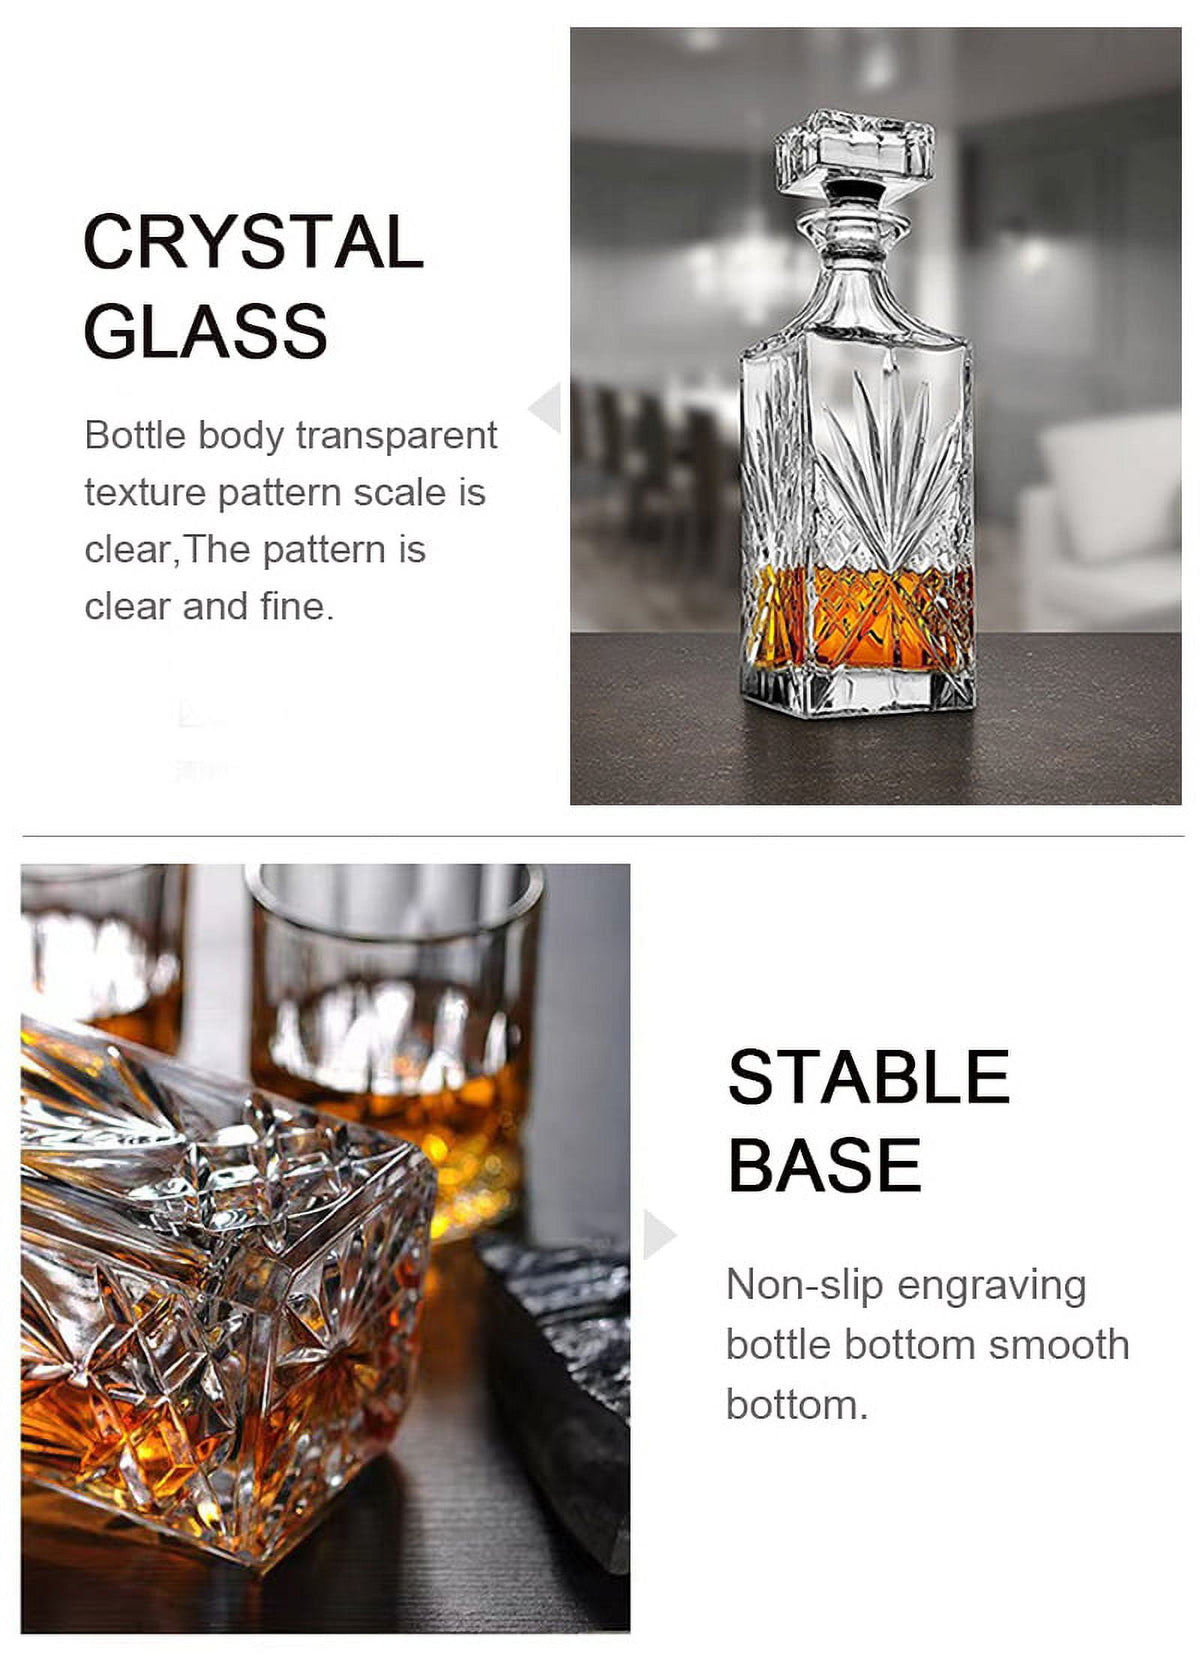 Whiskey Decanter Set with Glasses, 5Pcs - Premium Gift Box for Men and Women - Rock Tumblers and Bottle for Bourbon, Cognac, and Liquo,Rum,Liquor - Old Fashioned Glassware